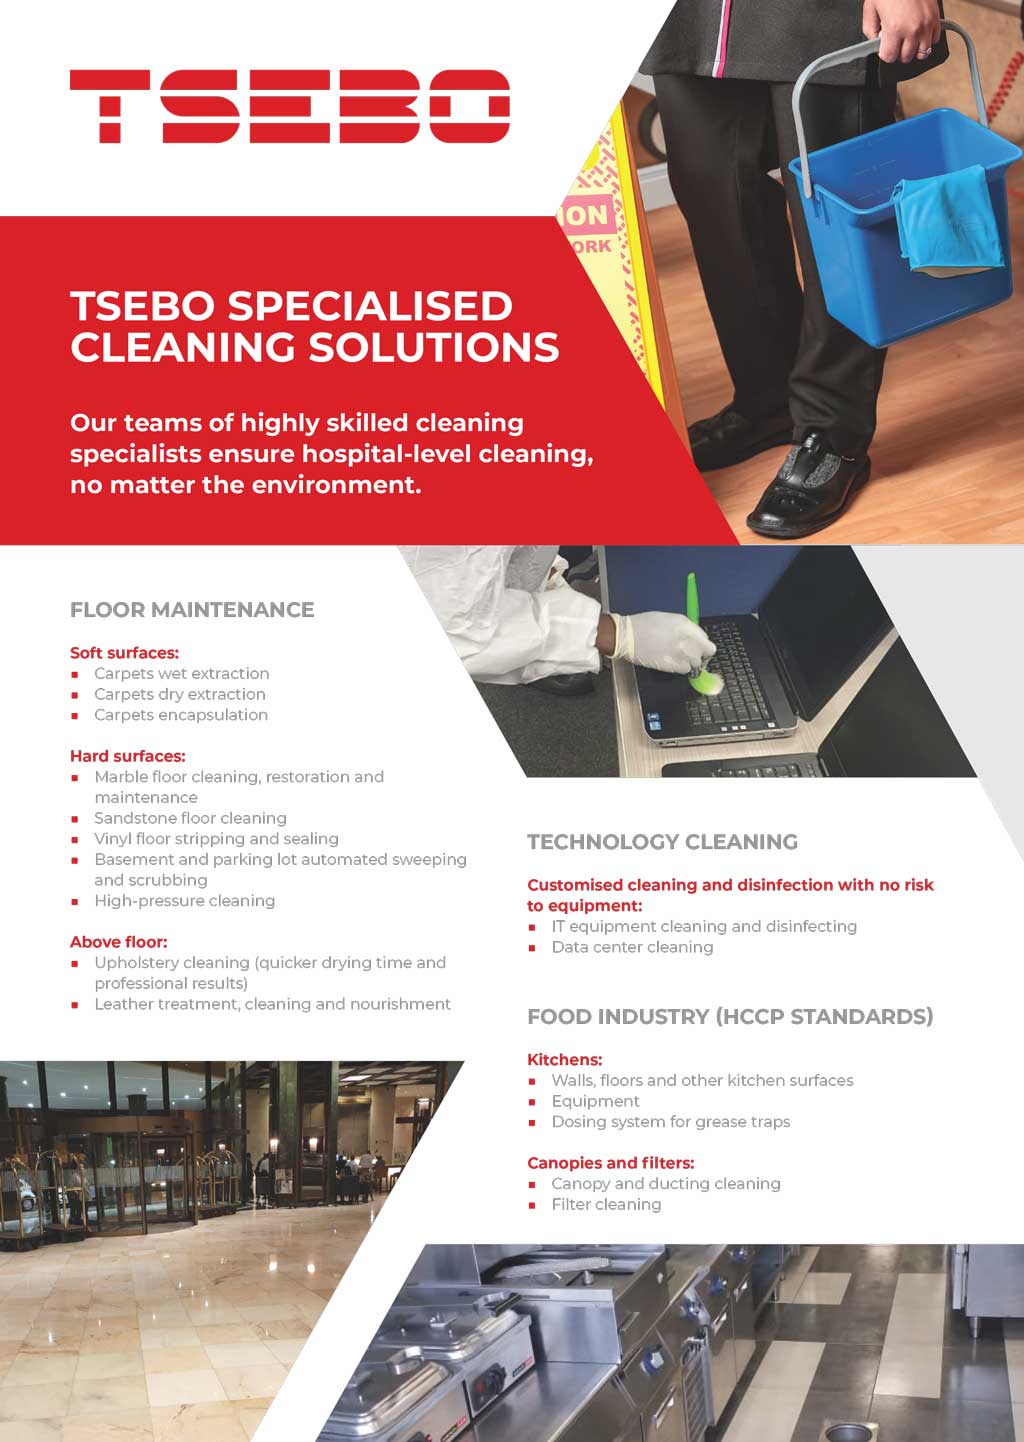 Tsebo Specialised Cleaning Flyer A4 PRINT 1